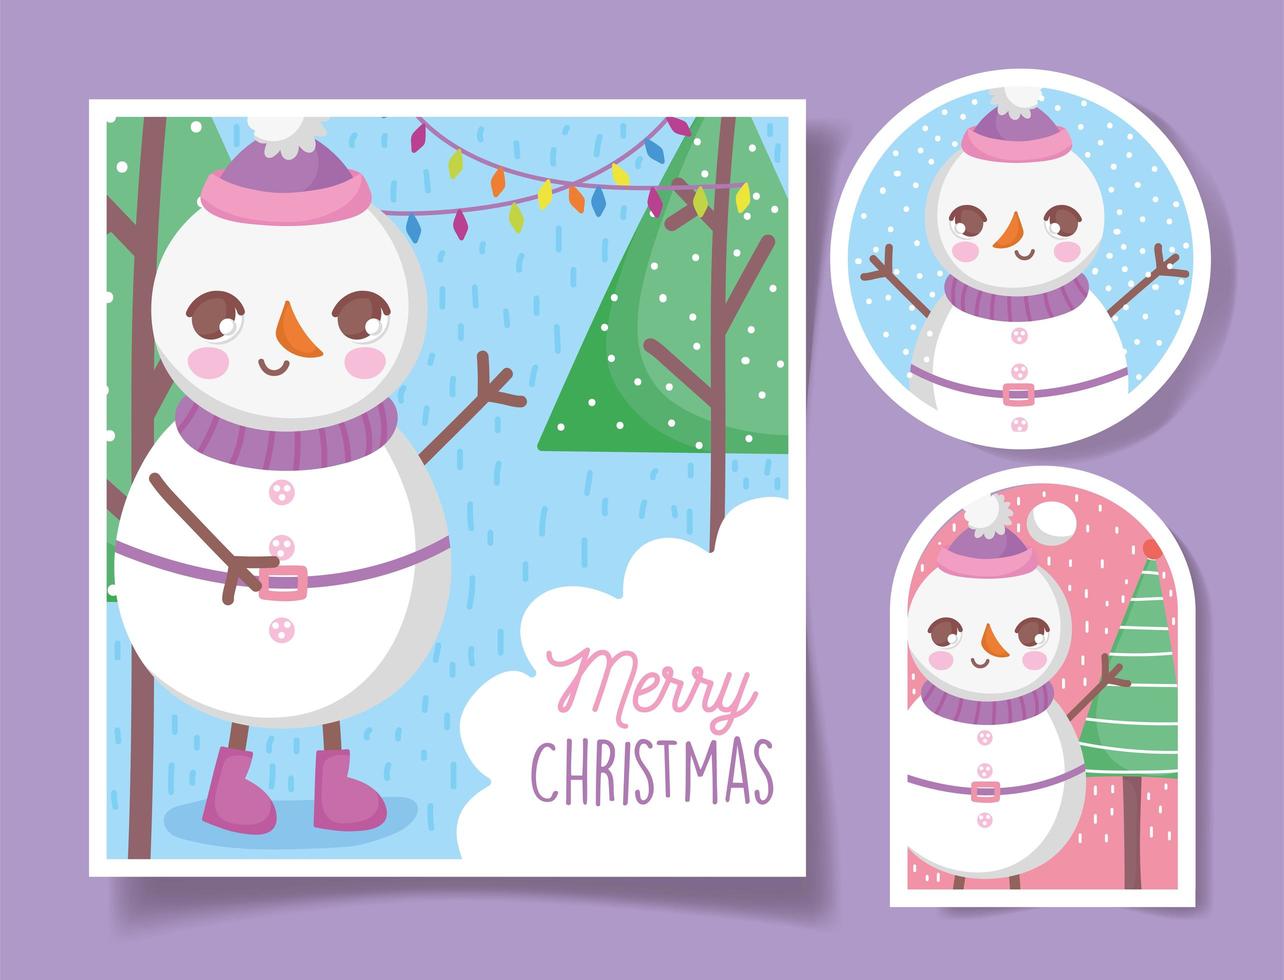 Cute Christmas tags with happy snowman vector